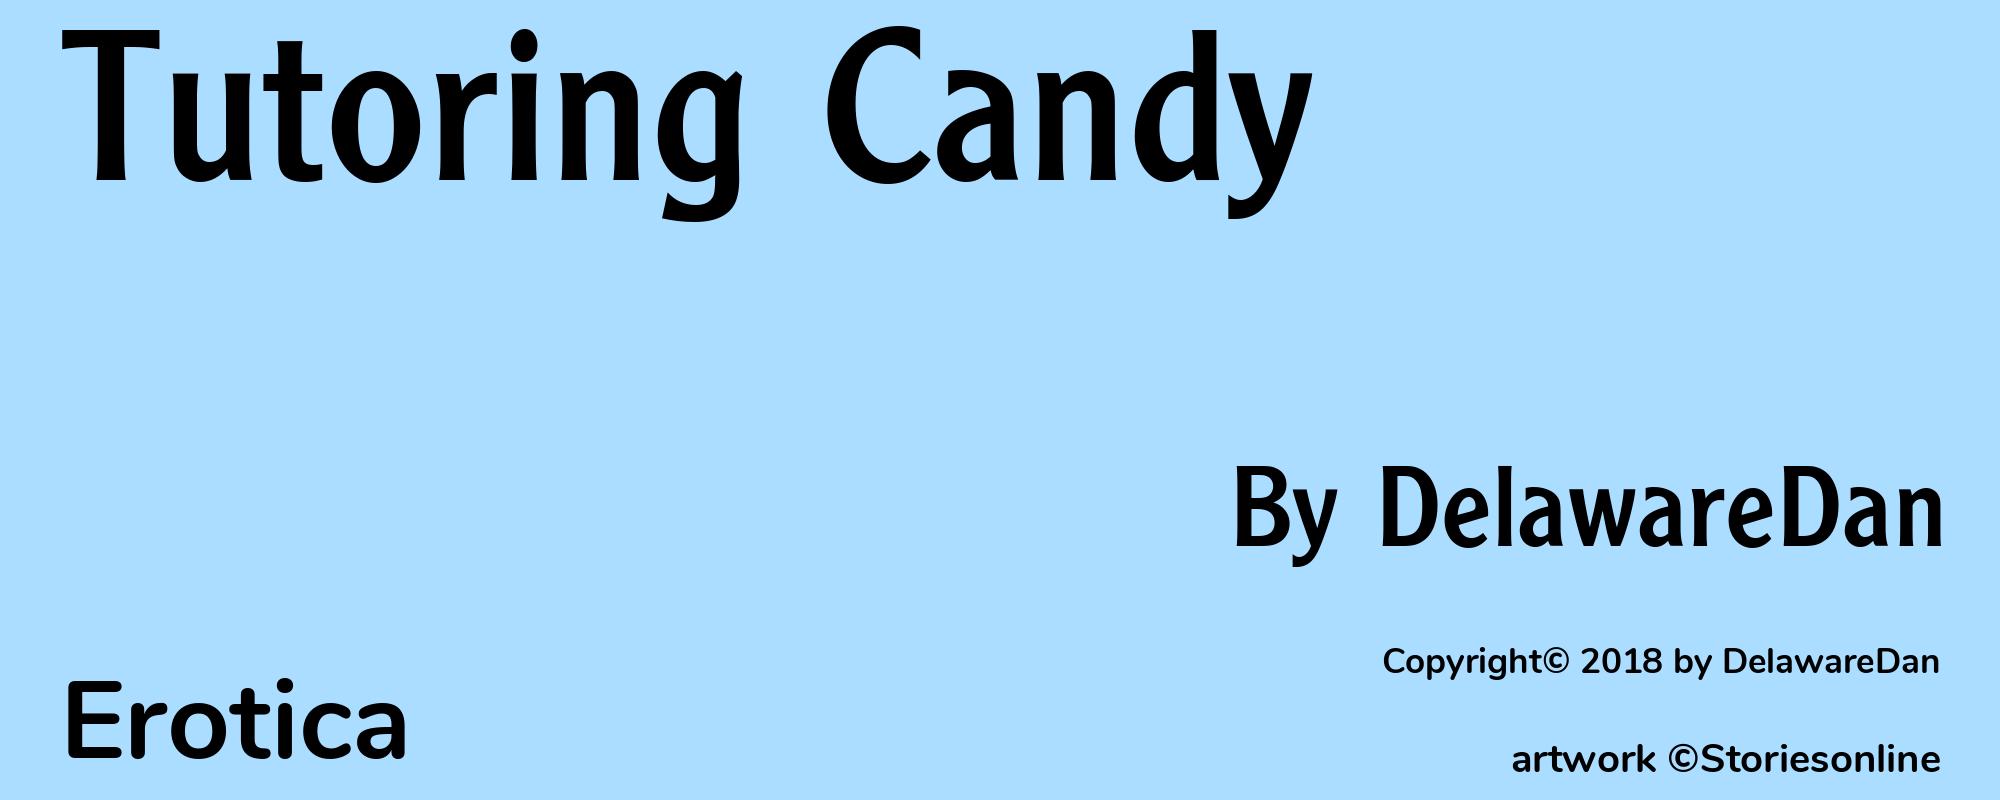 Tutoring Candy - Cover